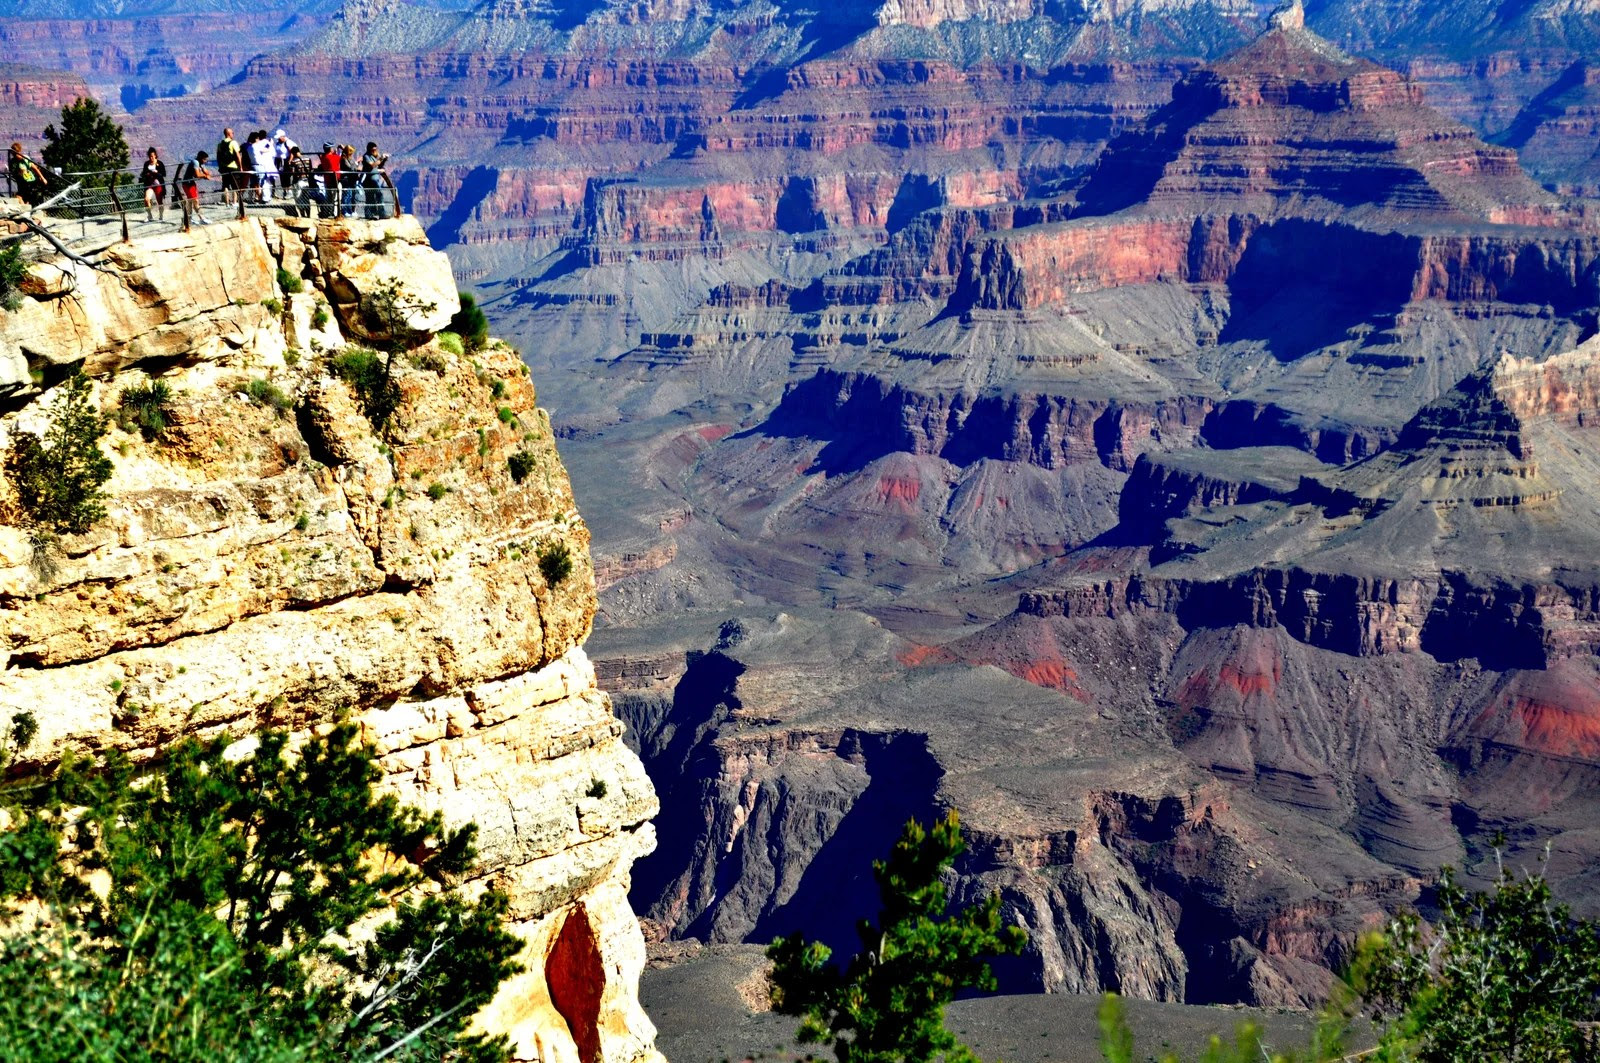 Web trailer village rv park is about a mile walk from the grand canyon's south rim, plus it has full hookups and other amenities. Grand Canyon National Park South Rim Day Tour from Las Vegas